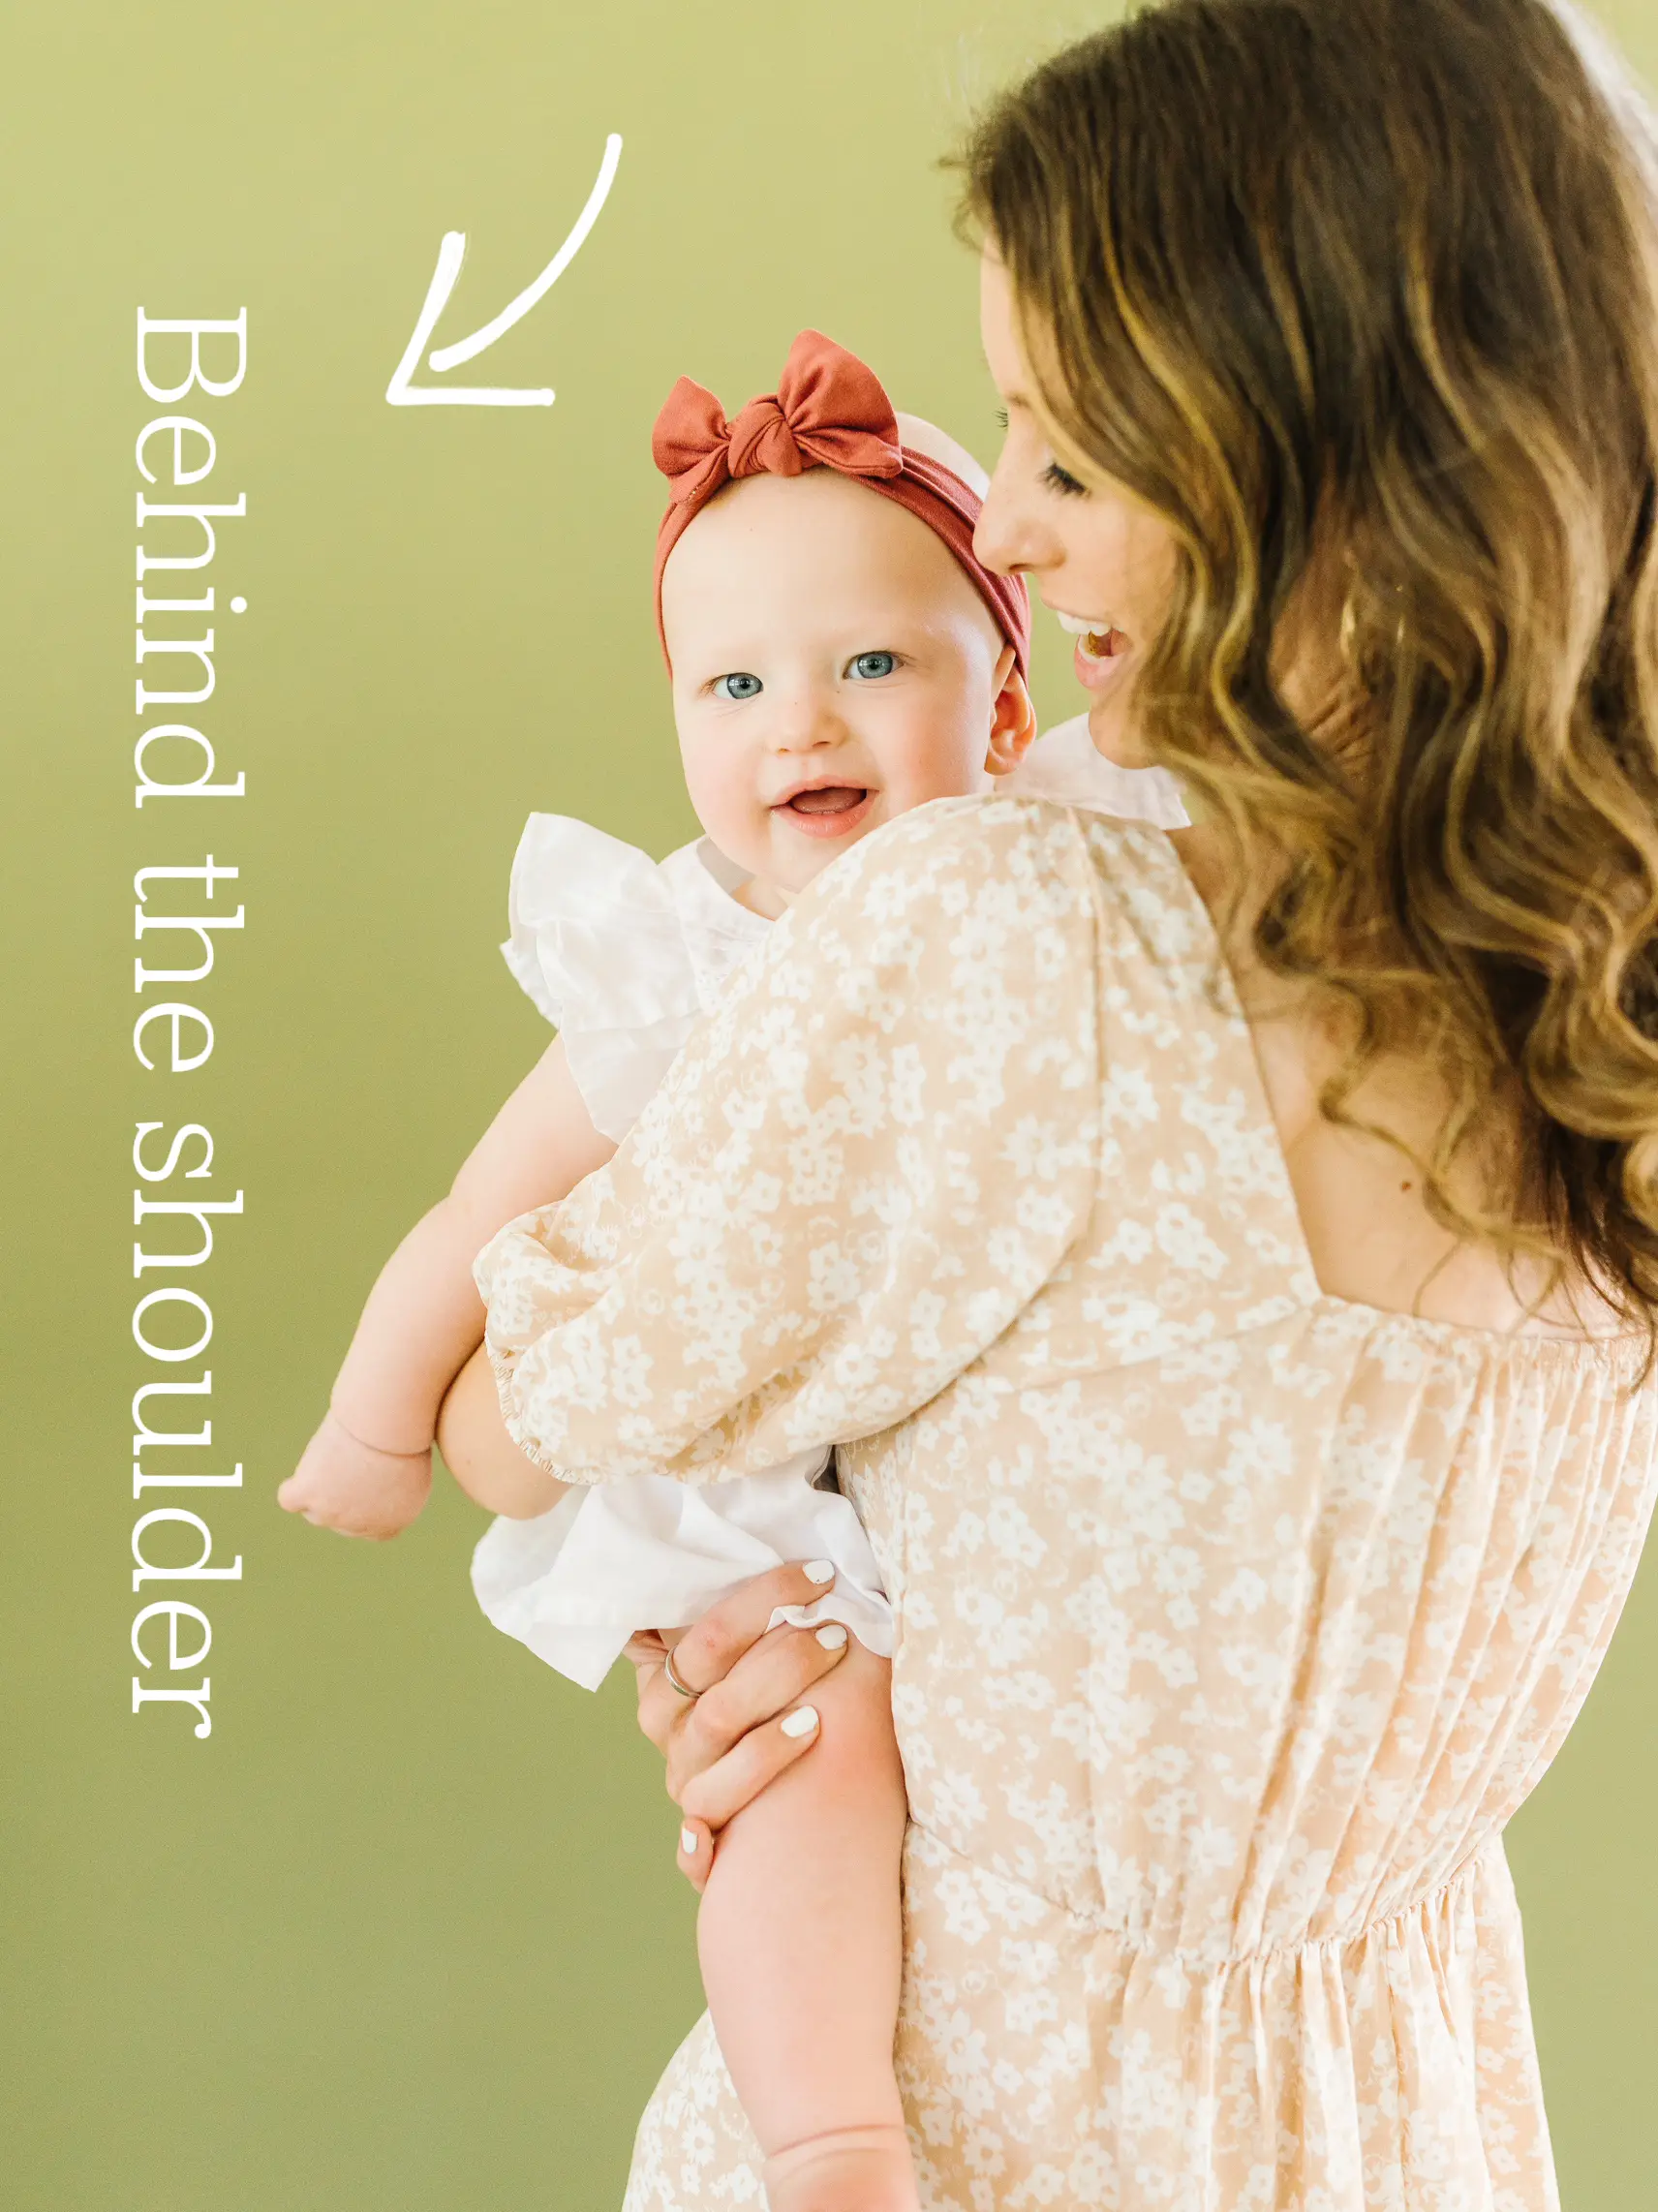 Your Postpartum Health: Caring for You While You Care for Baby – MINA BAIE